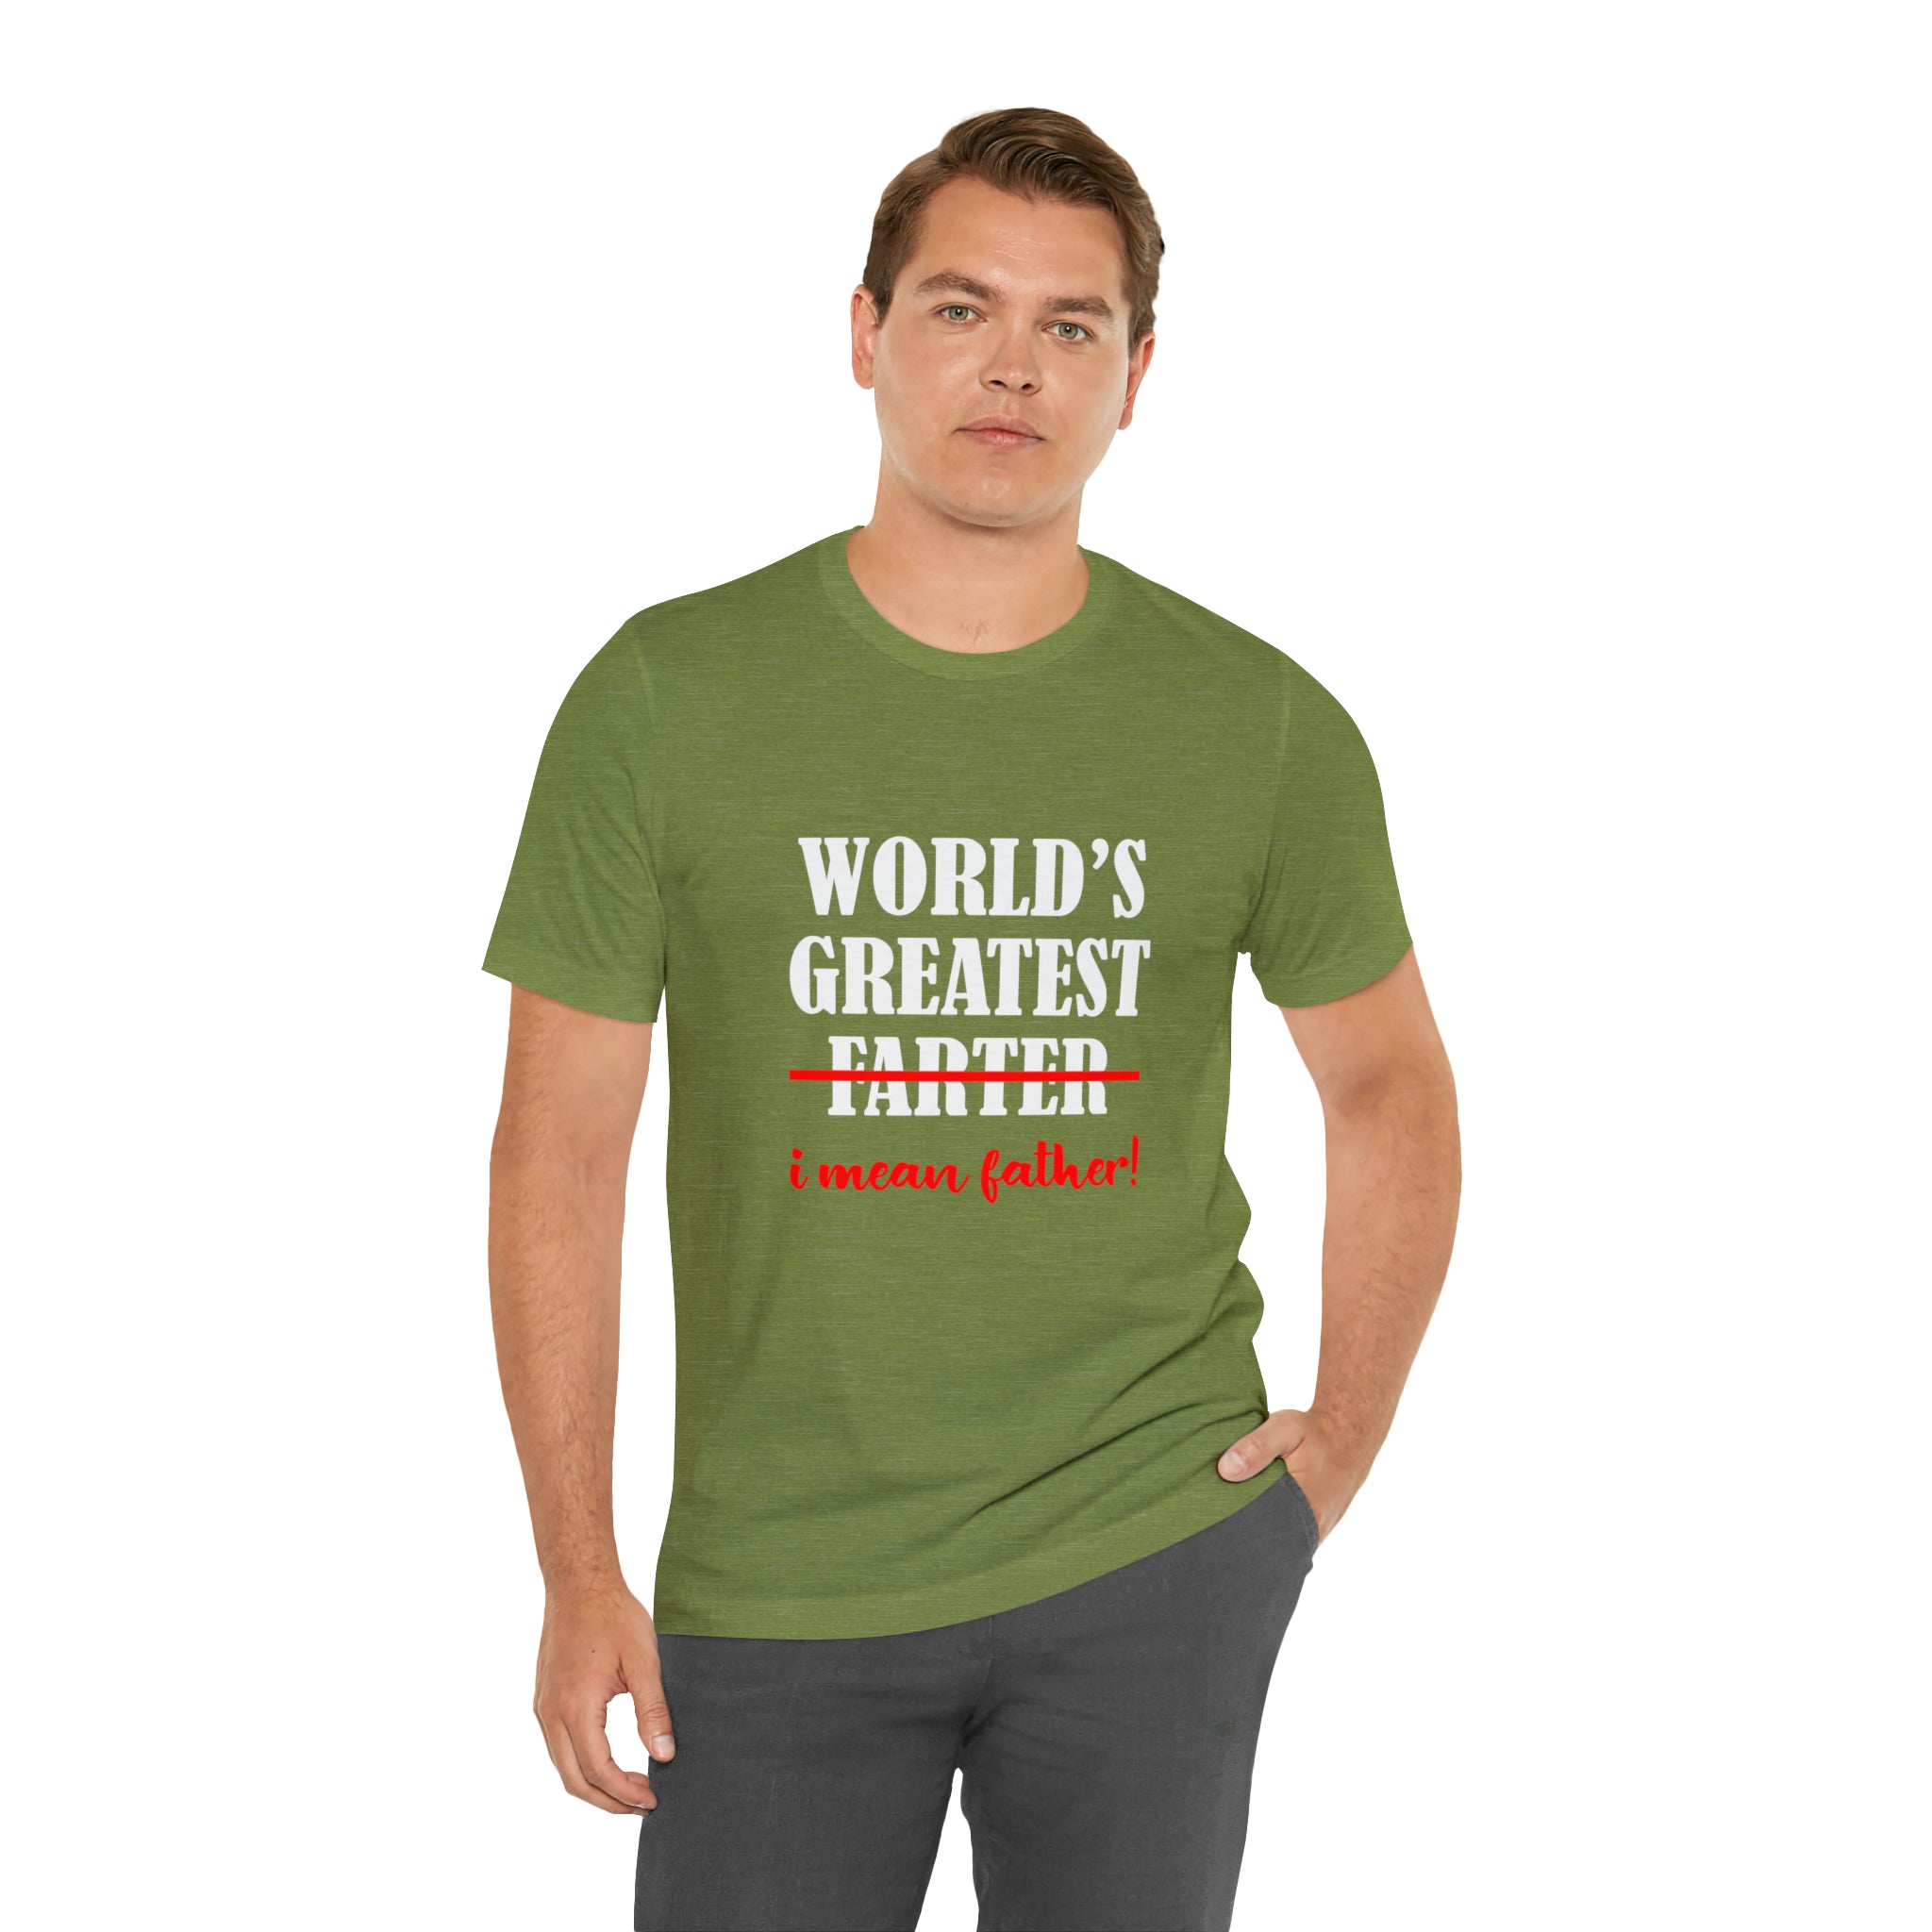 A humorous father wearing a Worlds Greatest Farter I mean Father T-Shirt.